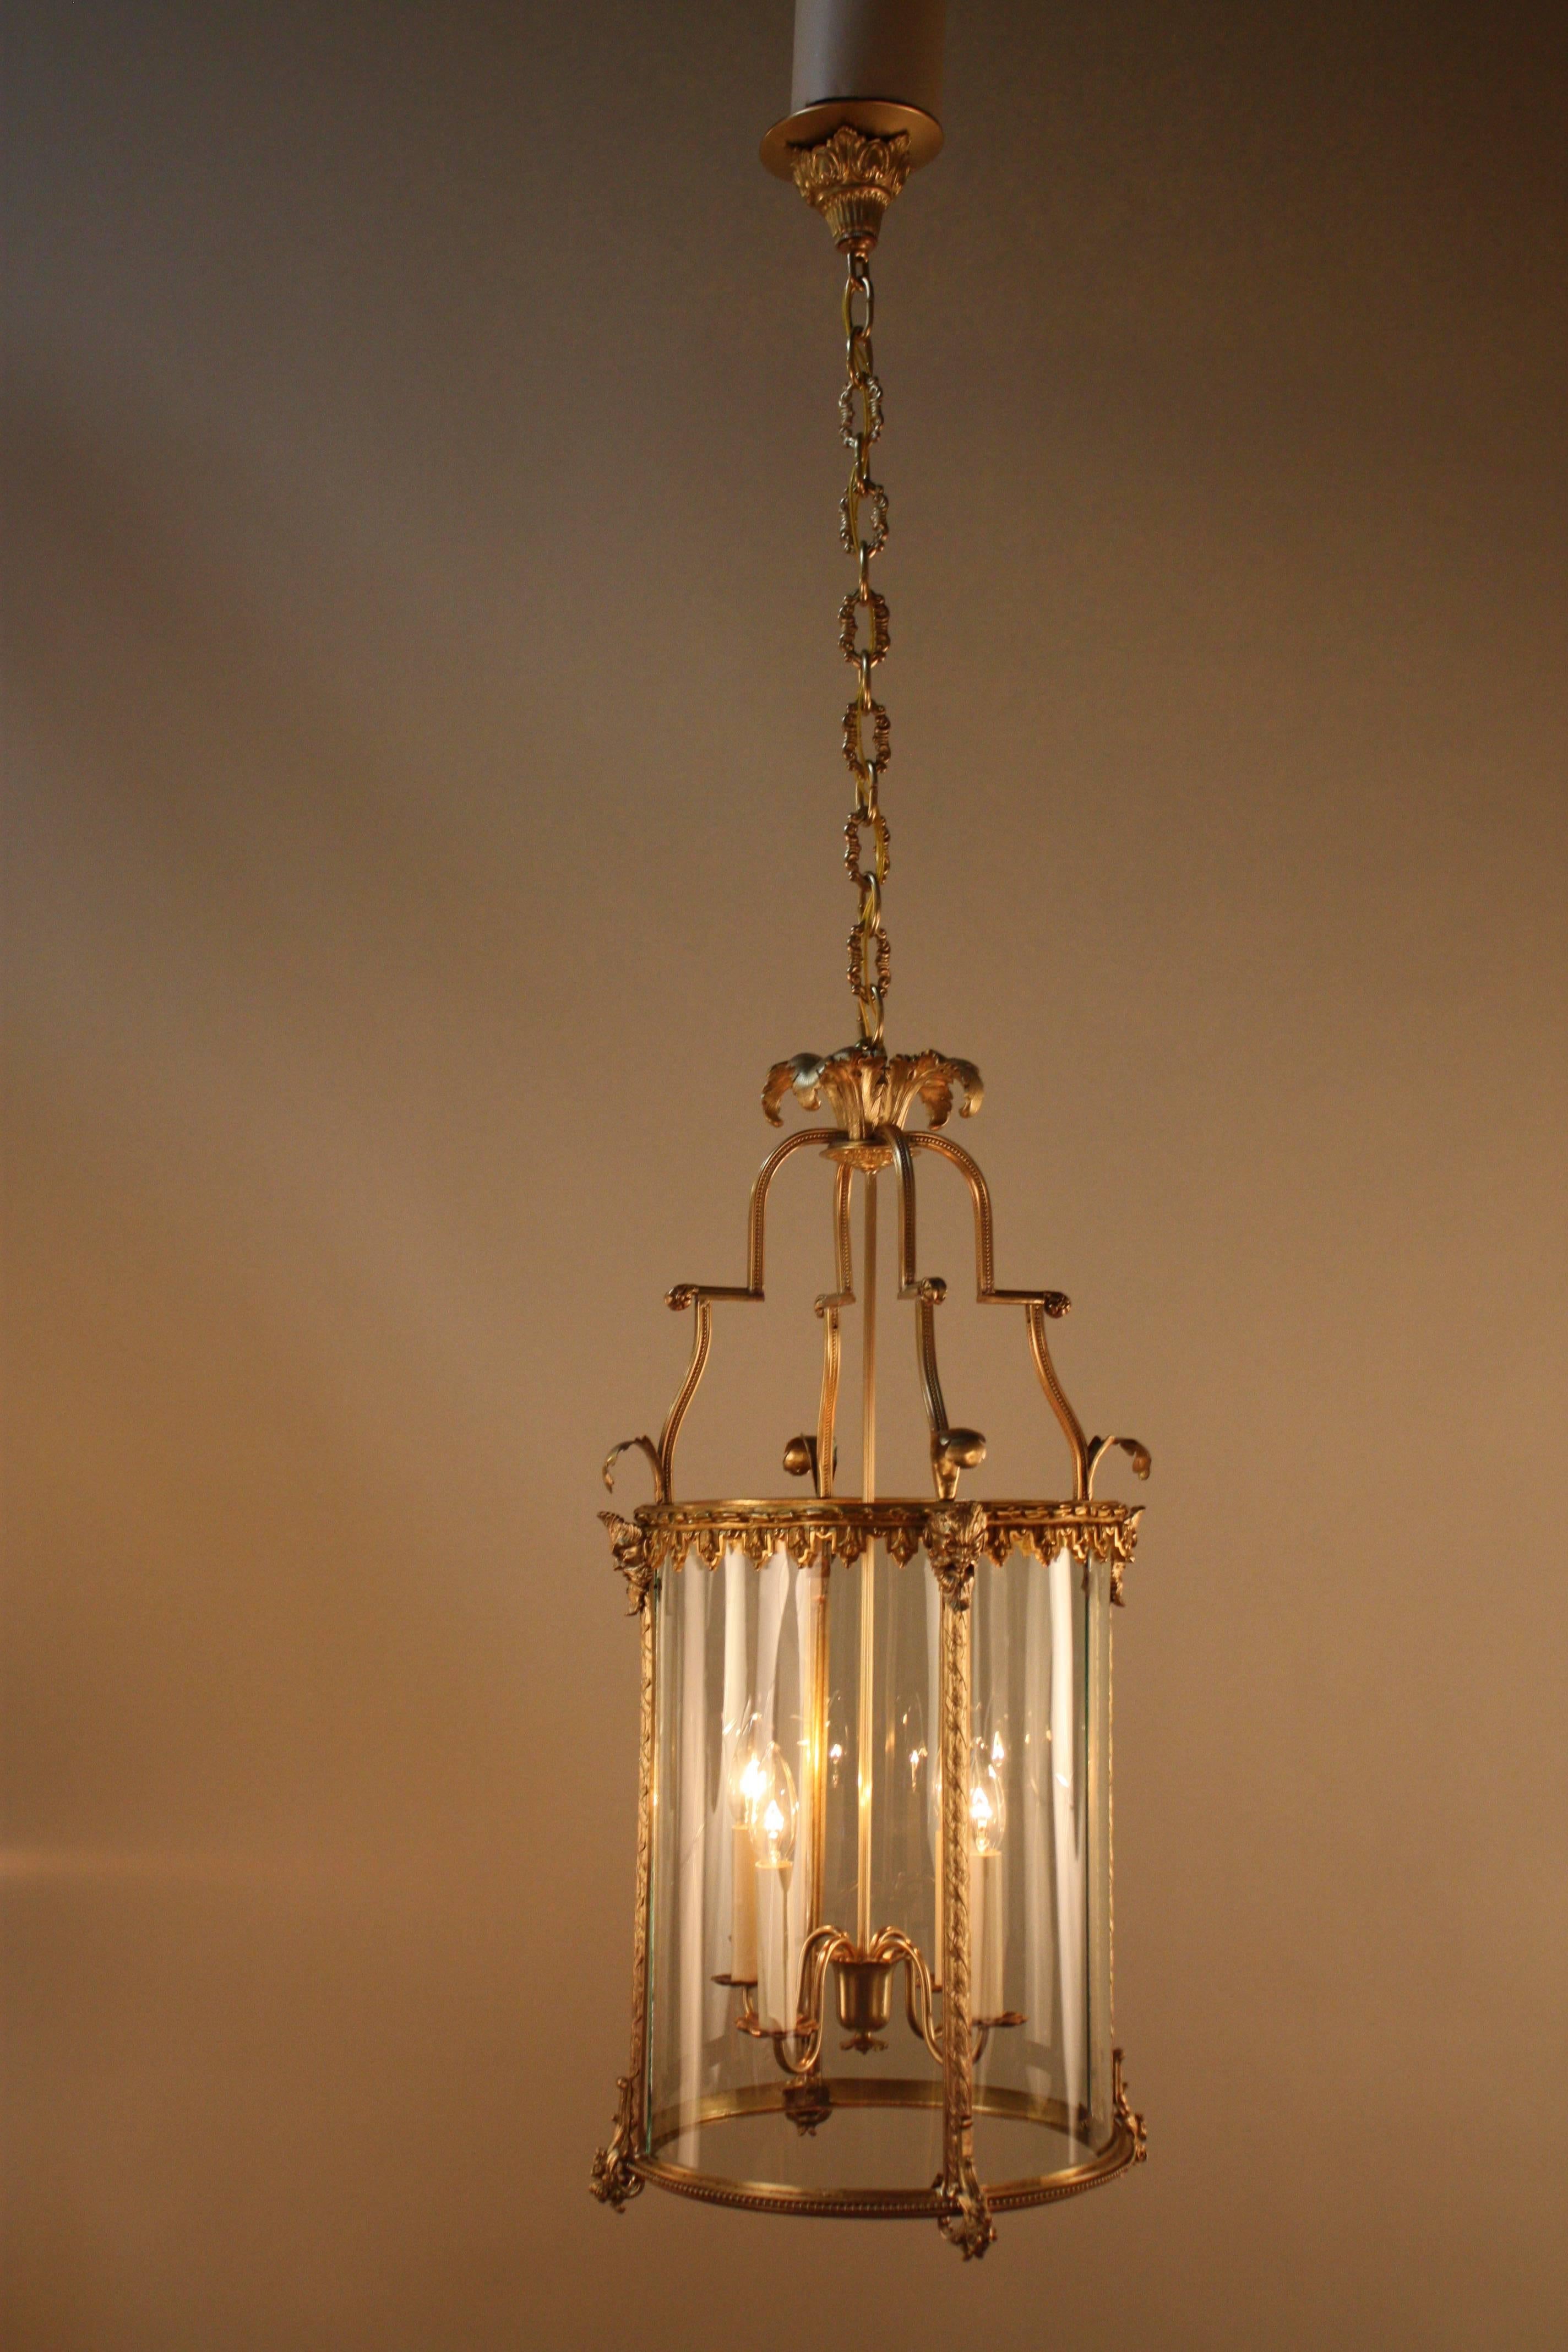 Elegant four-light early 20th century French bronze lantern.
Minimum height fully installed with one link of chain and canopy is 36